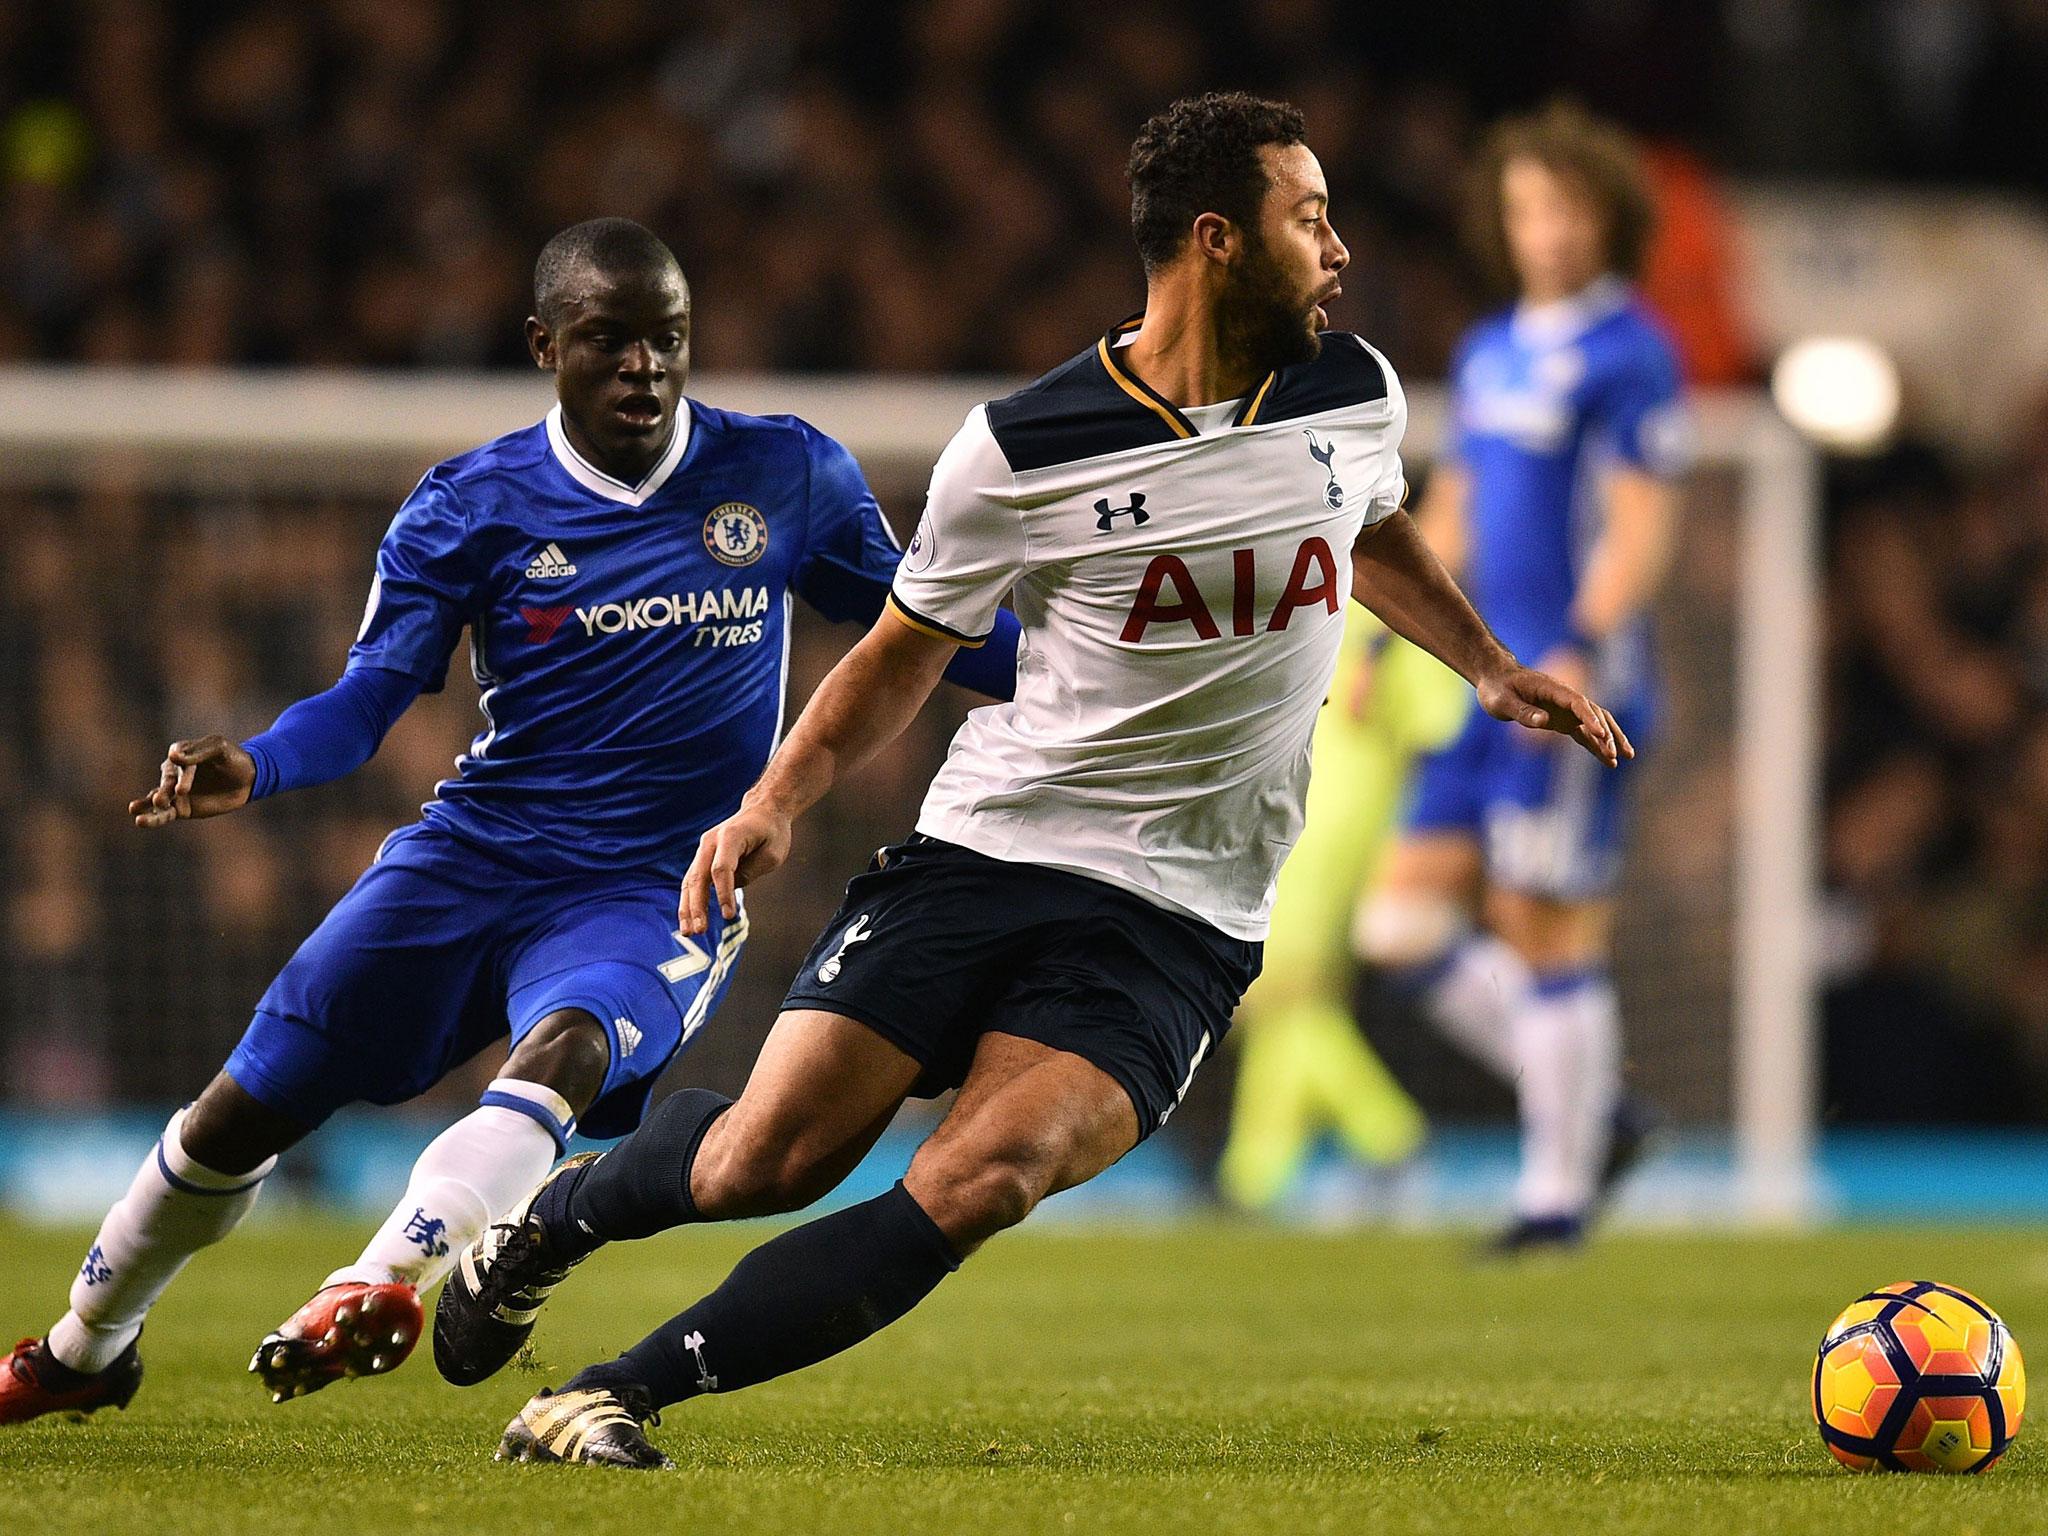 Dembele put in another commanding midfield performance on Wednesday night